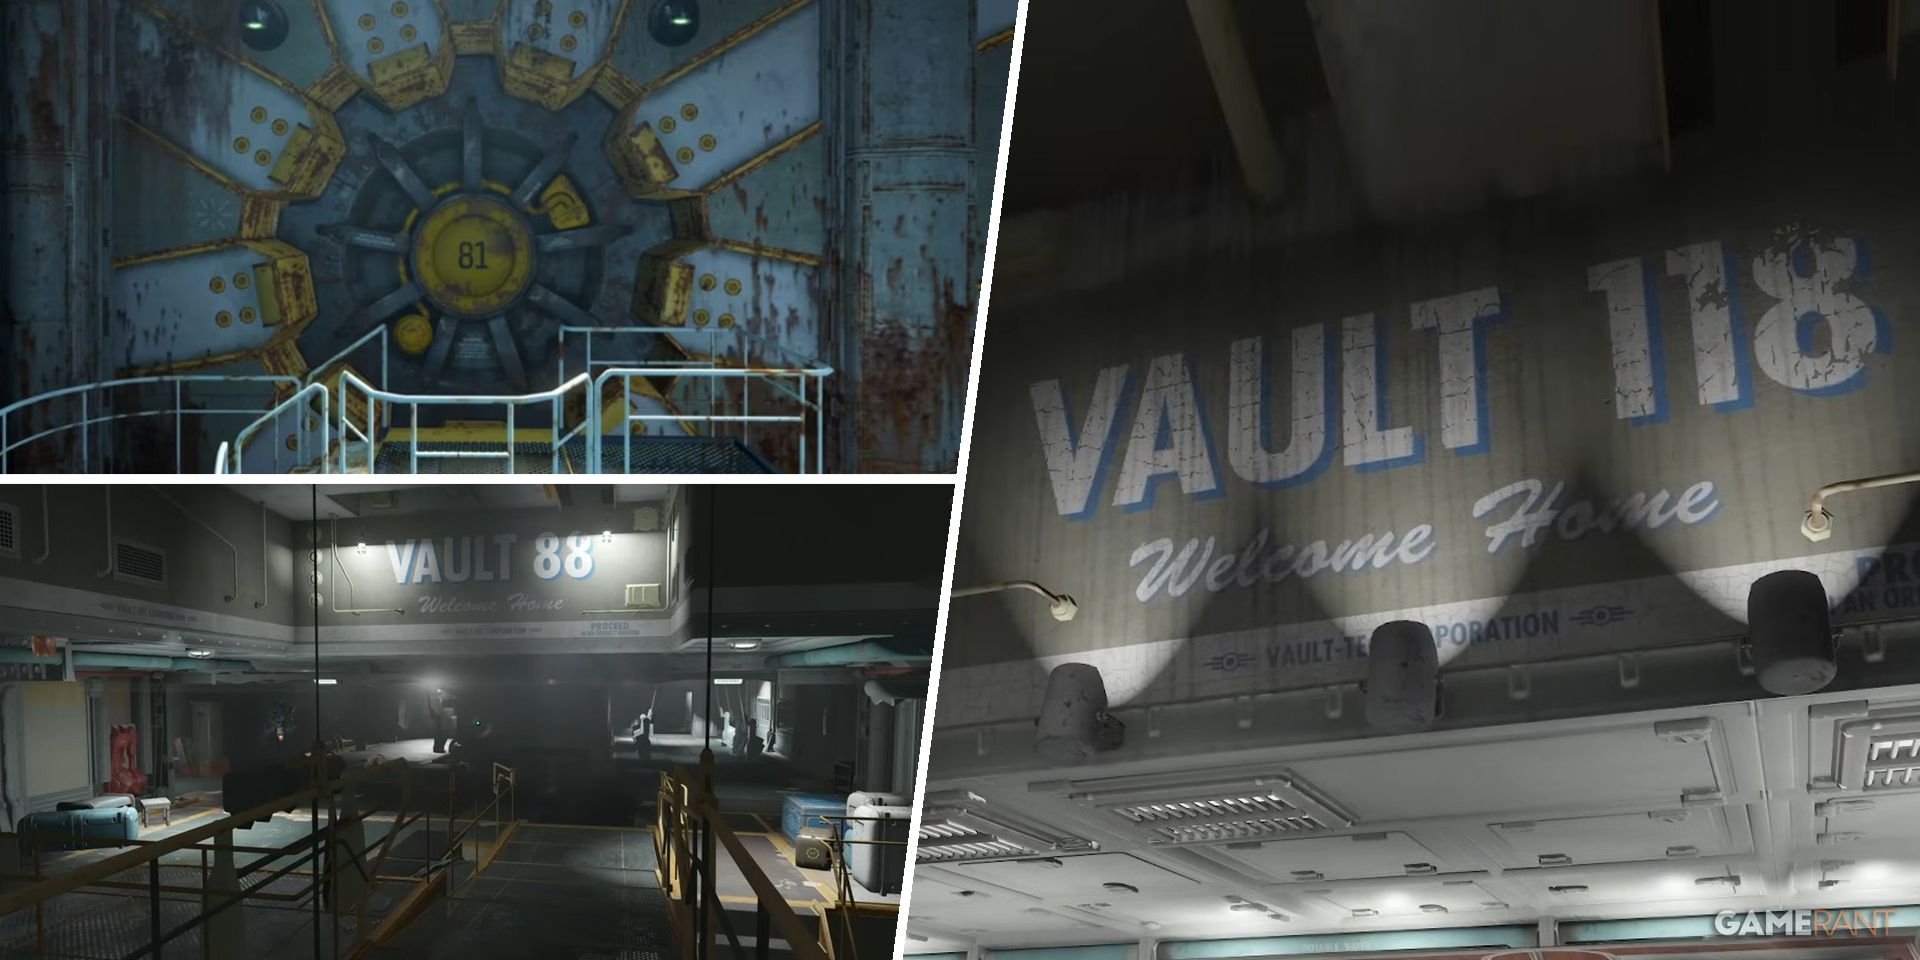 Three of the vaults from Fallout 4